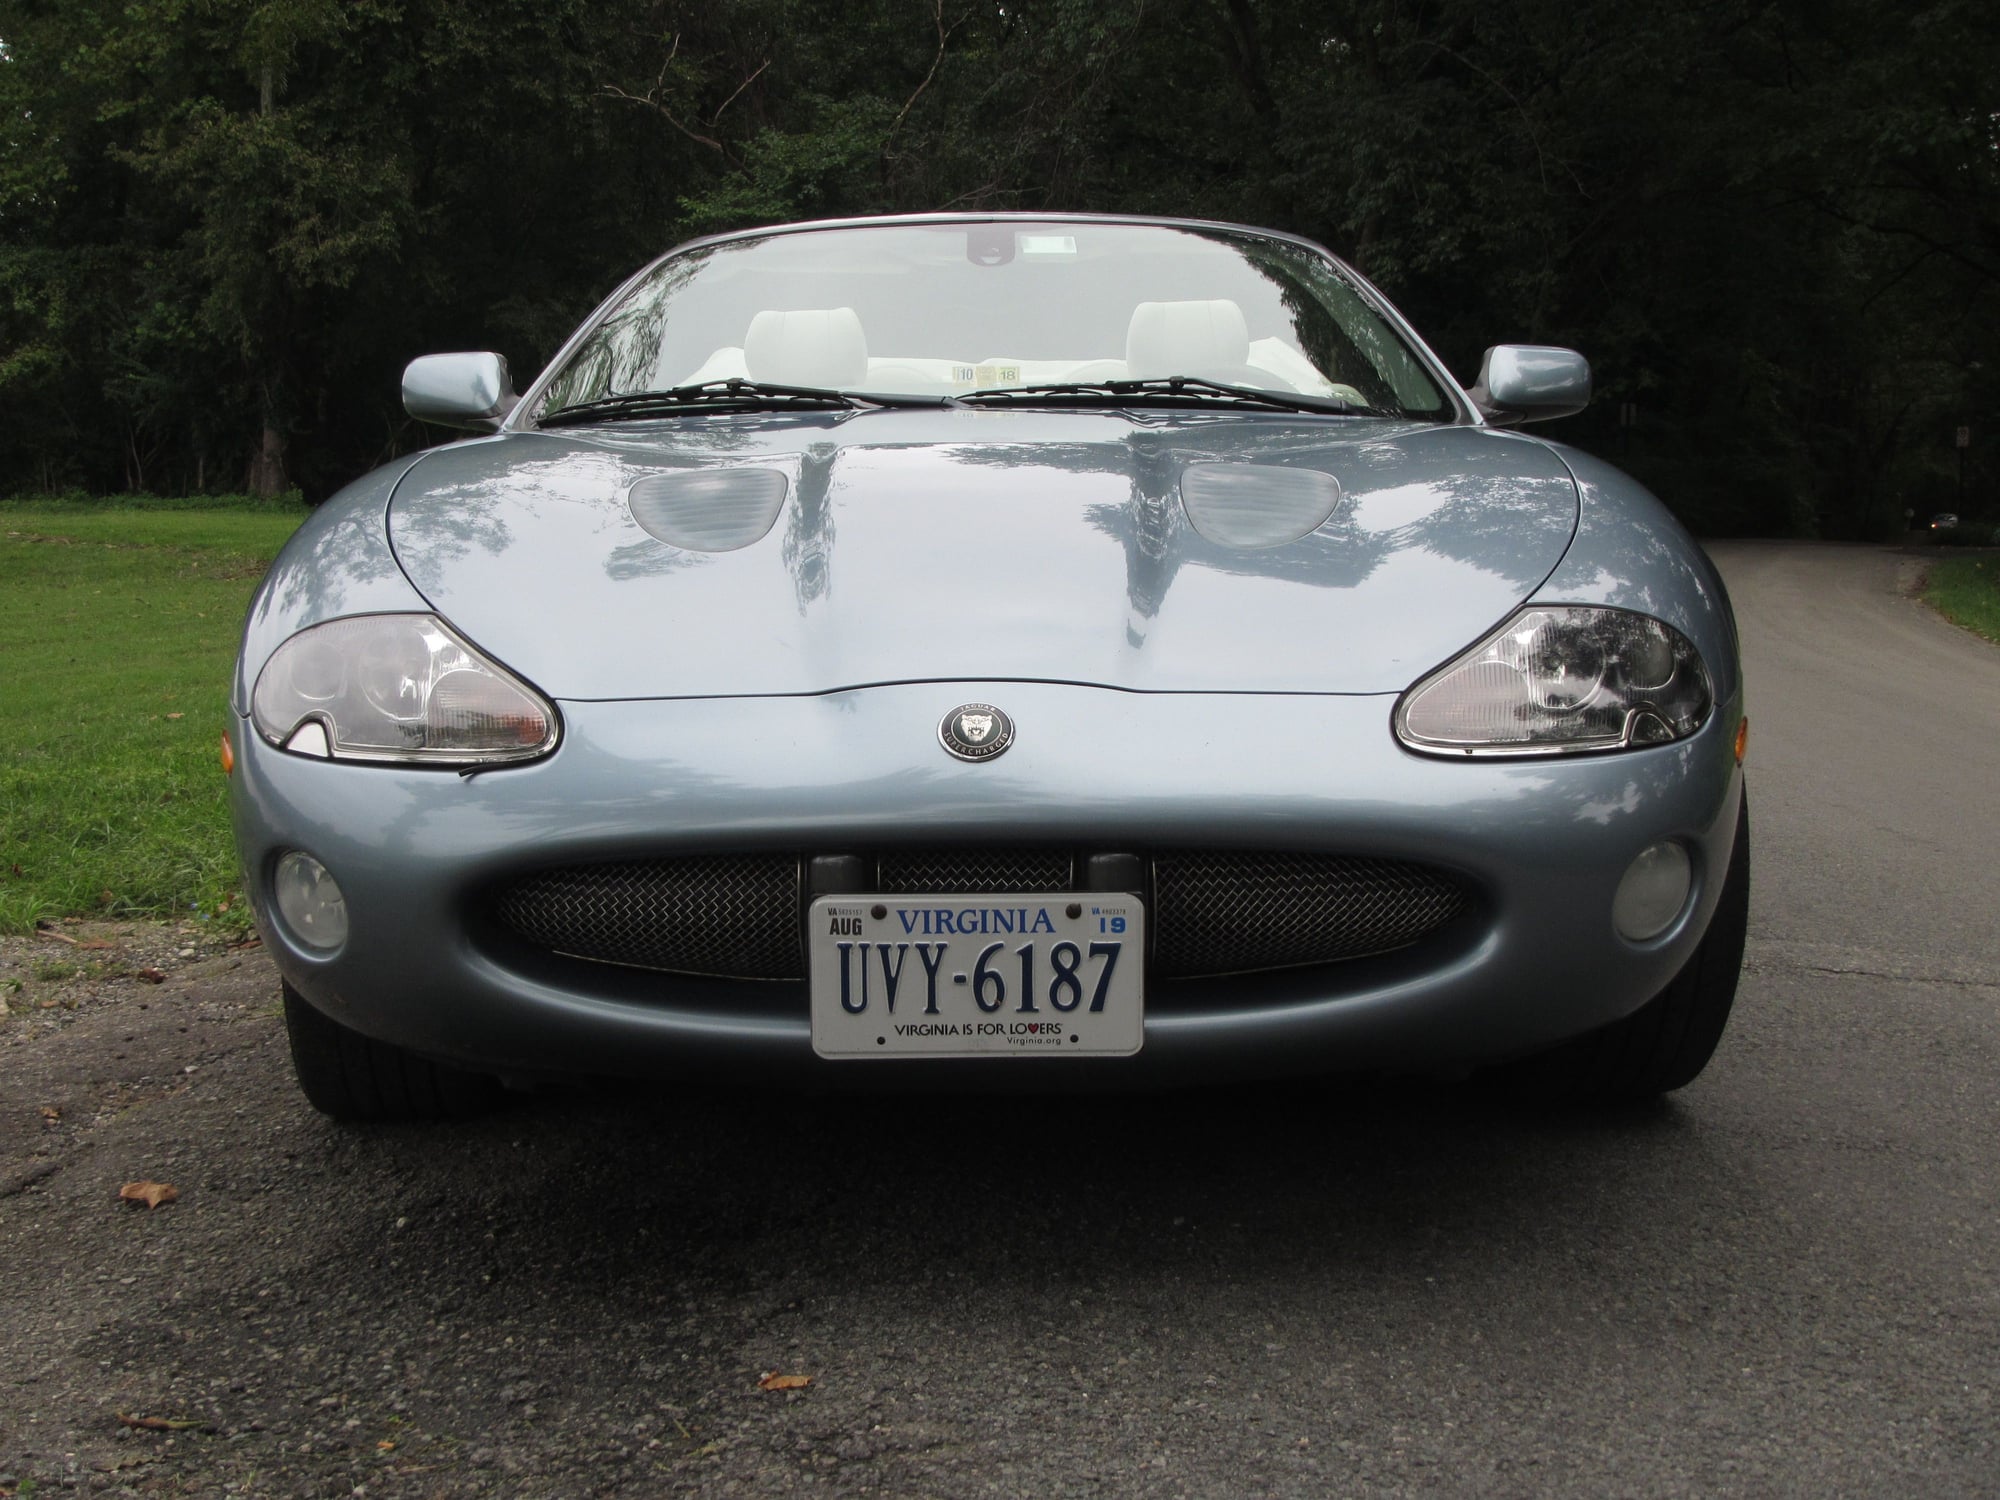 2003 Jaguar XKR - 2003 Jaguar XKR Convertible - Great Looking and Running Classic - Used - VIN SAJDA42B733A35999 - 100,750 Miles - 8 cyl - 2WD - Automatic - Convertible - Blue - Richmond, VA 23226, United States